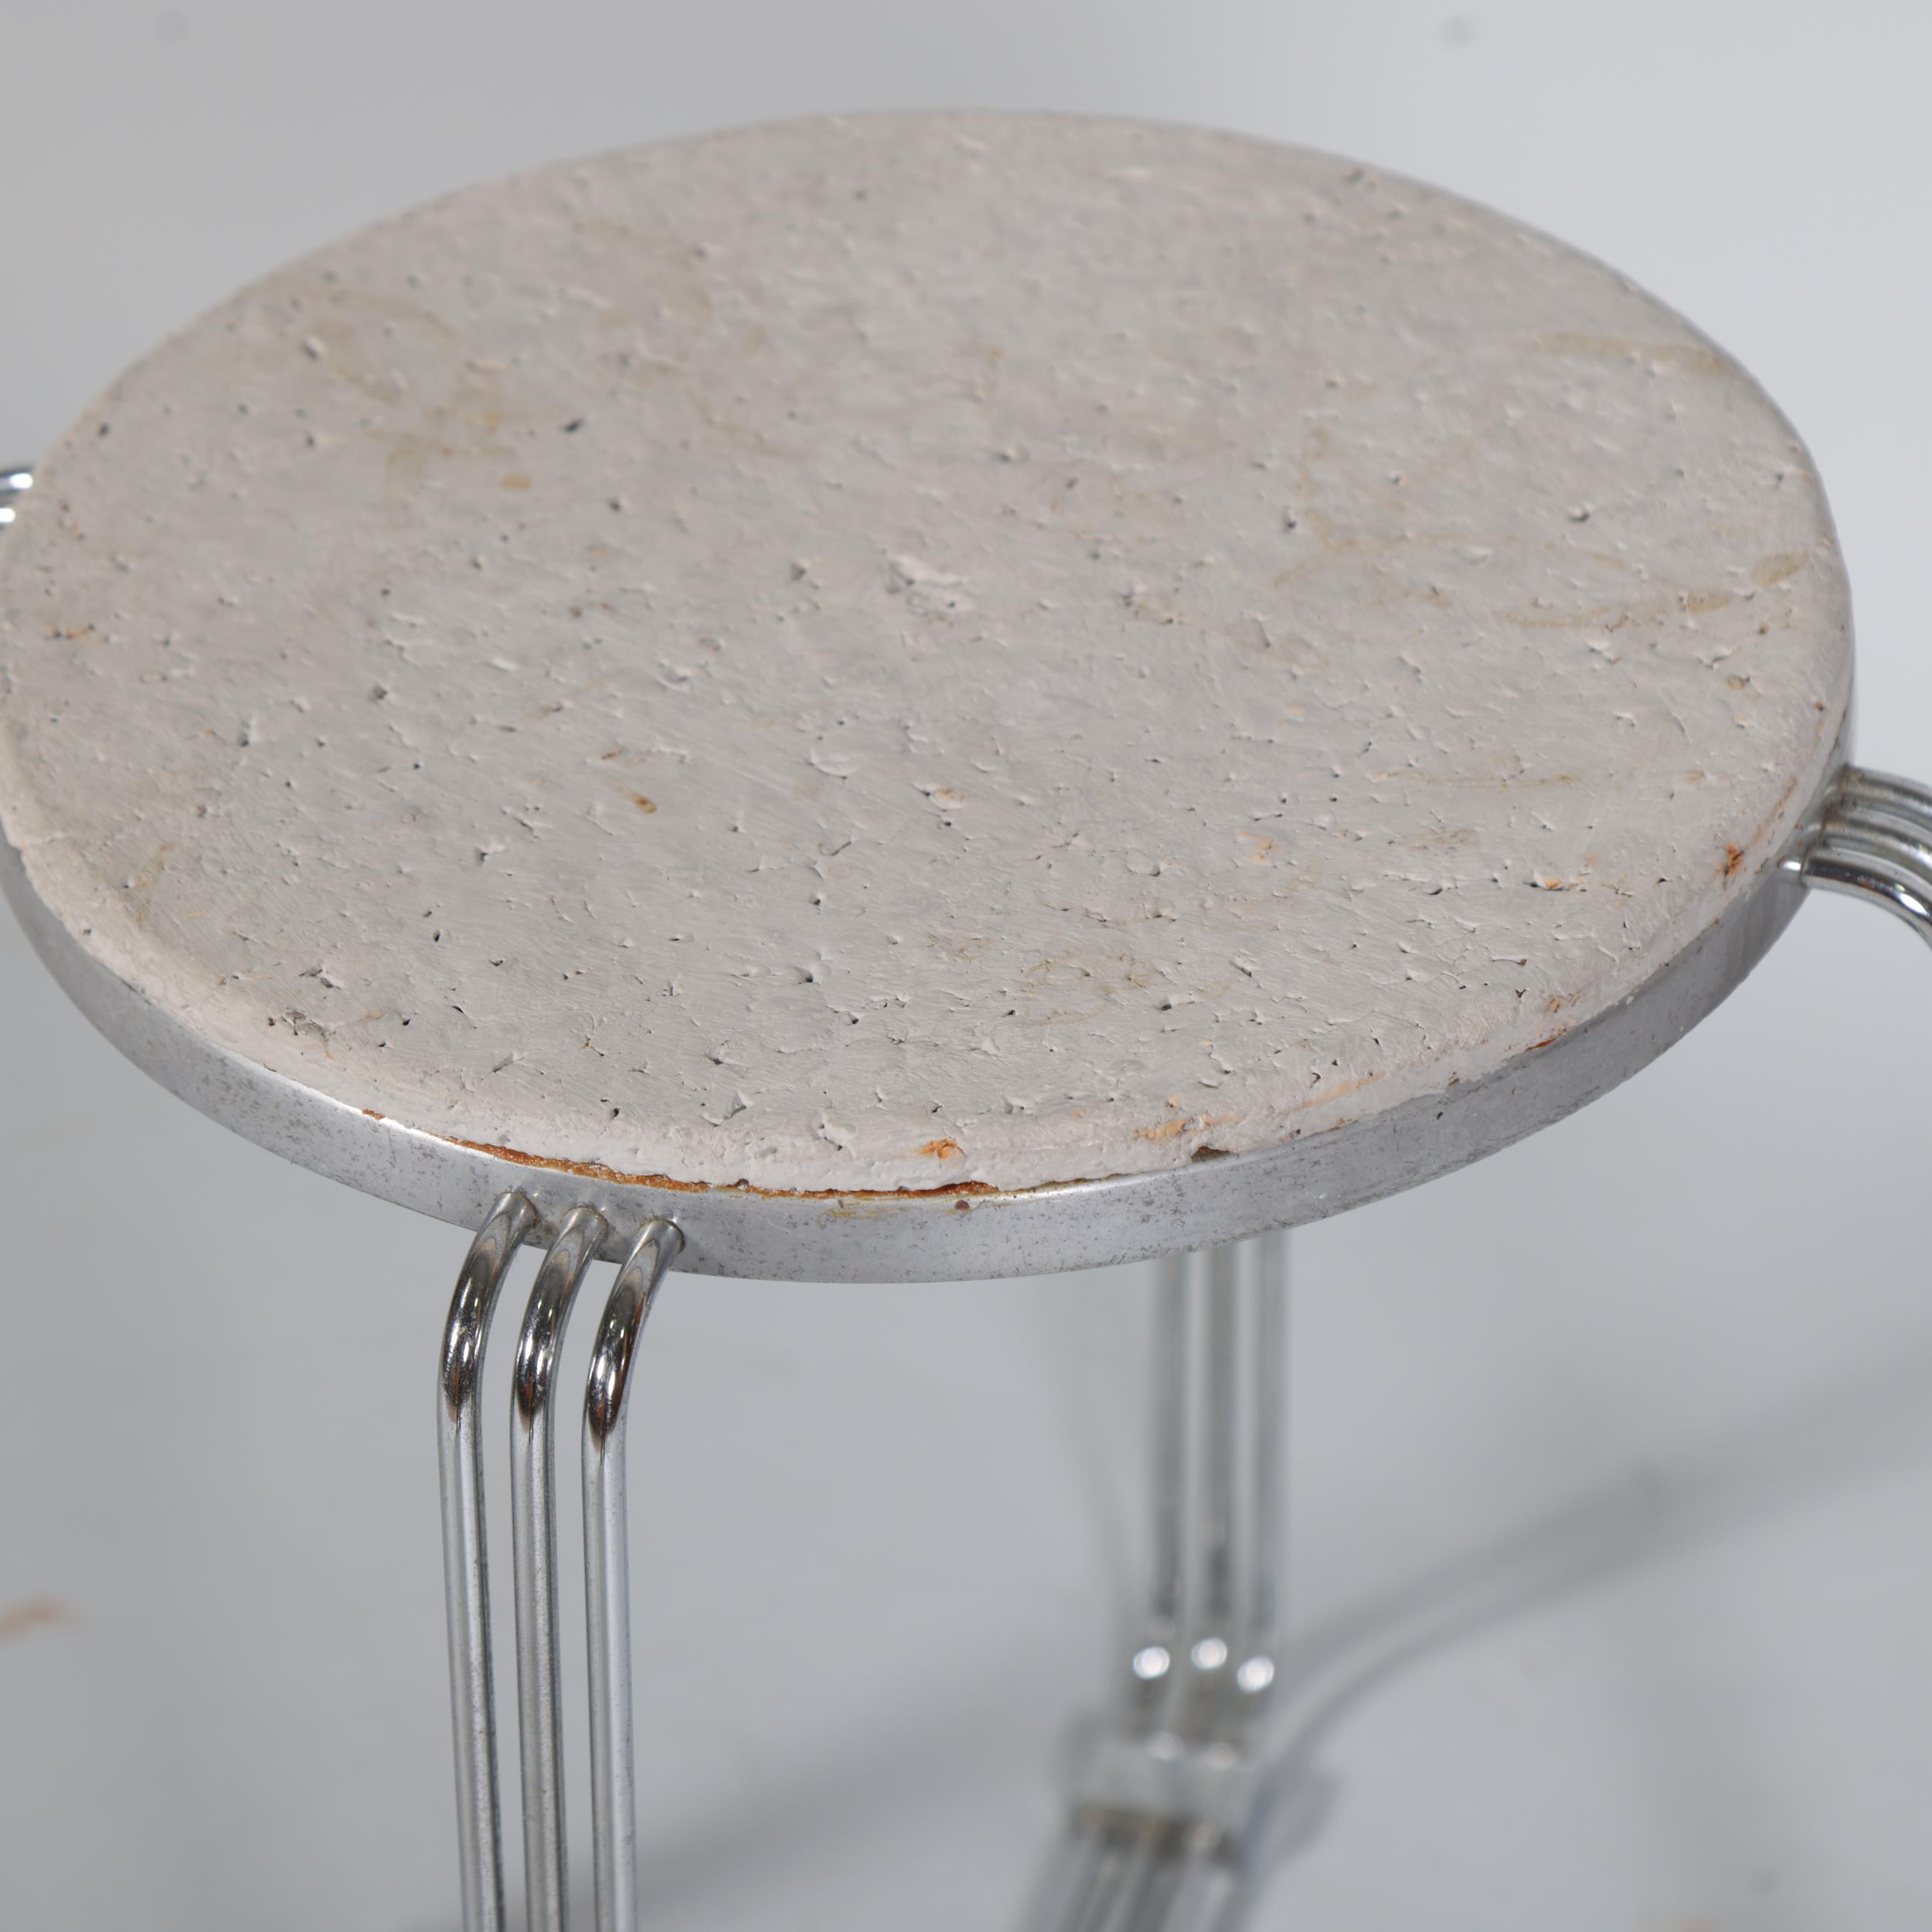 A 1930s' Art Deco Alpax chrome steel stool with cork and aluminium seat, height 41cm Possible - Image 2 of 4